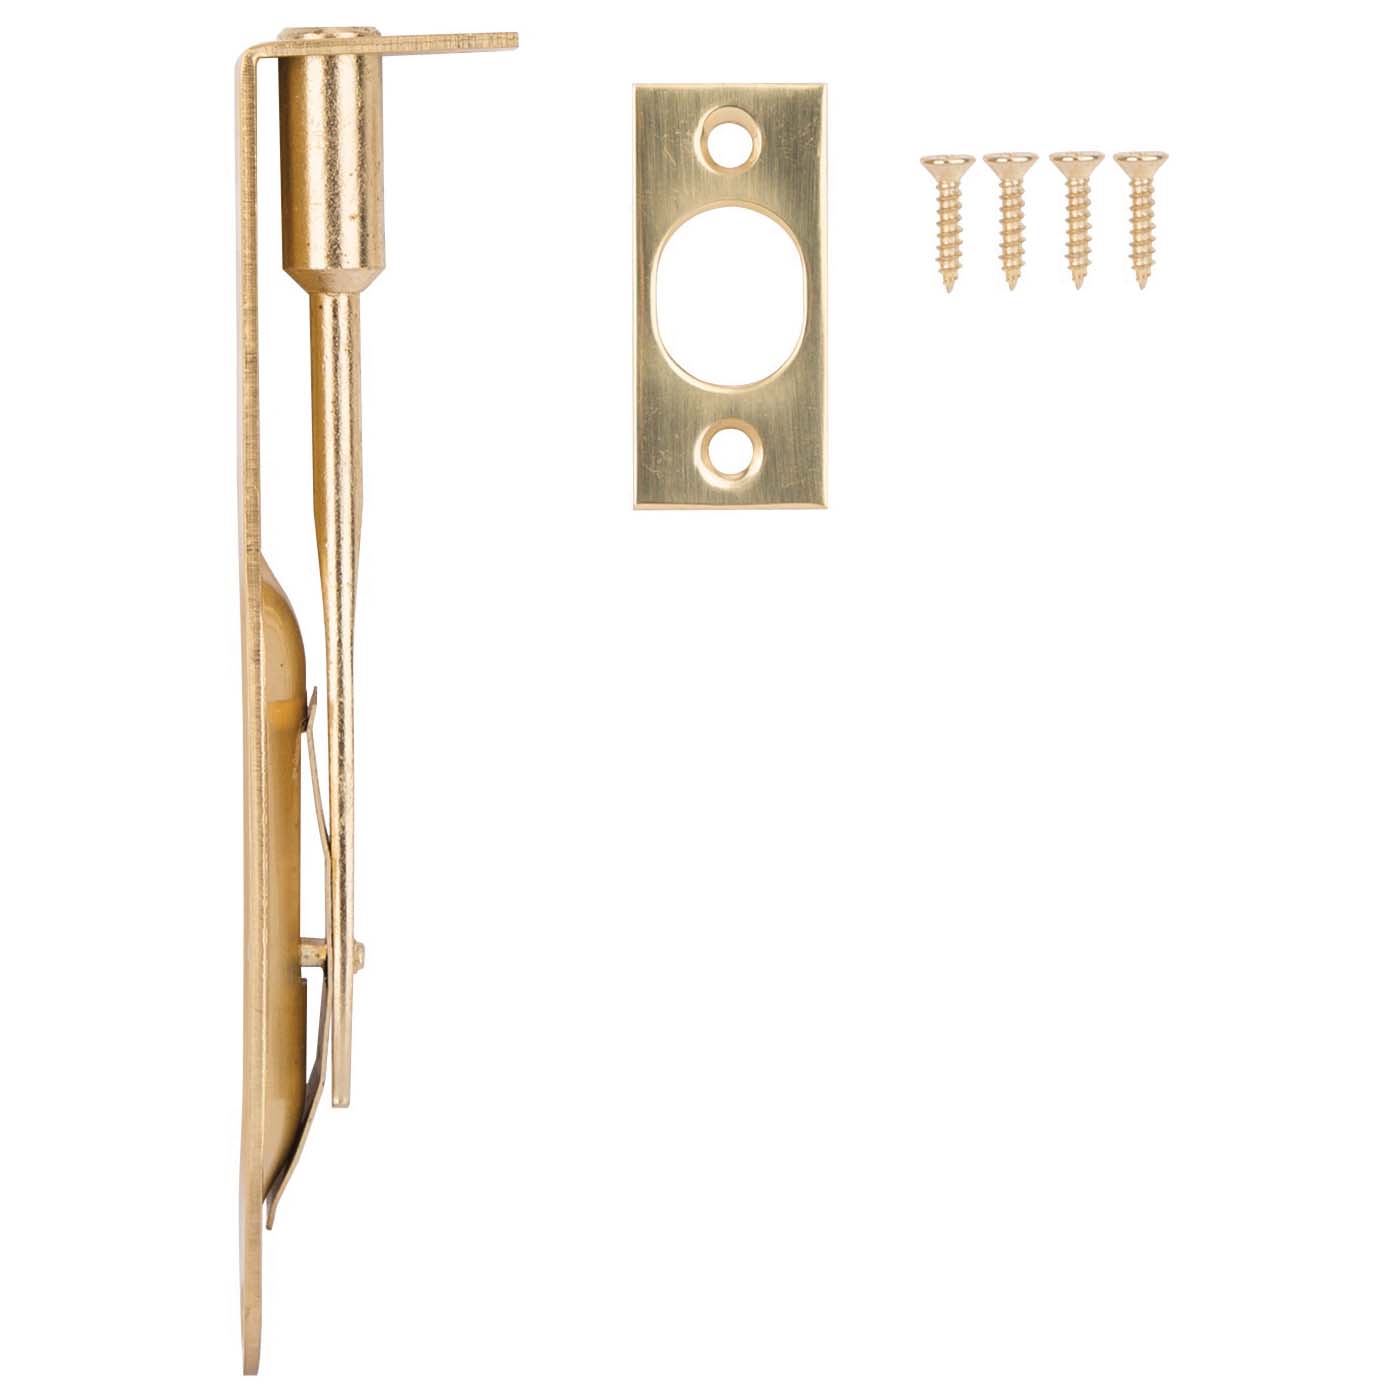 LR-004-PS Flush Bolt, 1 x 1/2 in Bolt Head, 5 in L Bolt, Solid Brass, Polished Brass